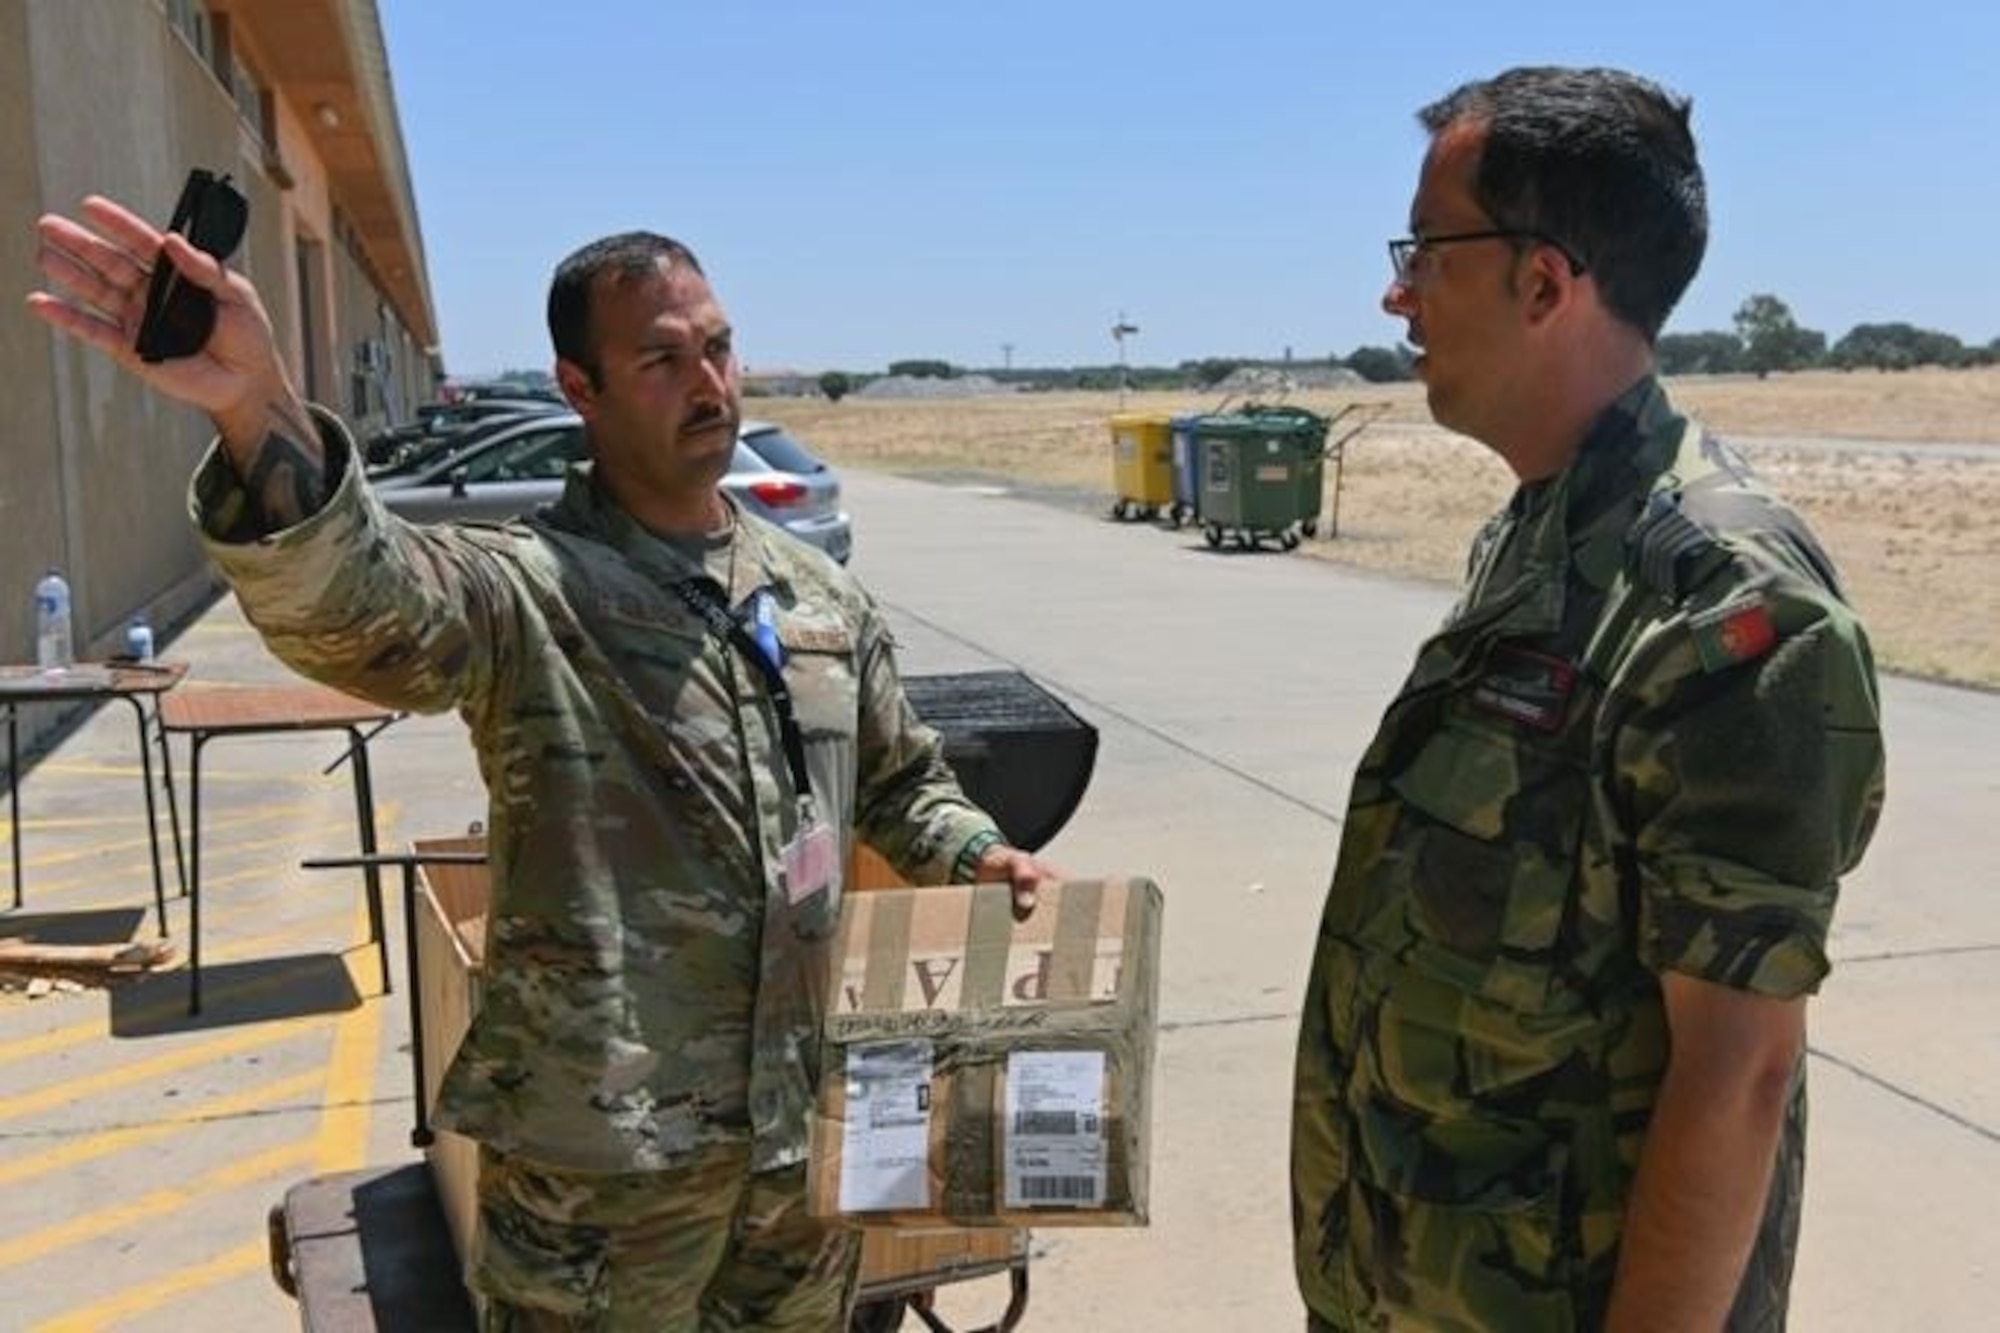 U.S. Air Force Master Sgt. Mark Majack, 52nd  Logistics Readiness Squadron cargo movement section chief (left), stationed at Spangdahlem Air Base, Germany, discusses logistical support with Portuguese air force 1st Sgt. Figueiredo at Exercise Real Thaw 22 on Beja Air Base, Portugal, July 6, 2022. Participation in joint exercises and training enhances NATO’s interoperability and readiness. (U.S. Air Force photo by Tech. Sgt. Warren D. Spearman Jr.)